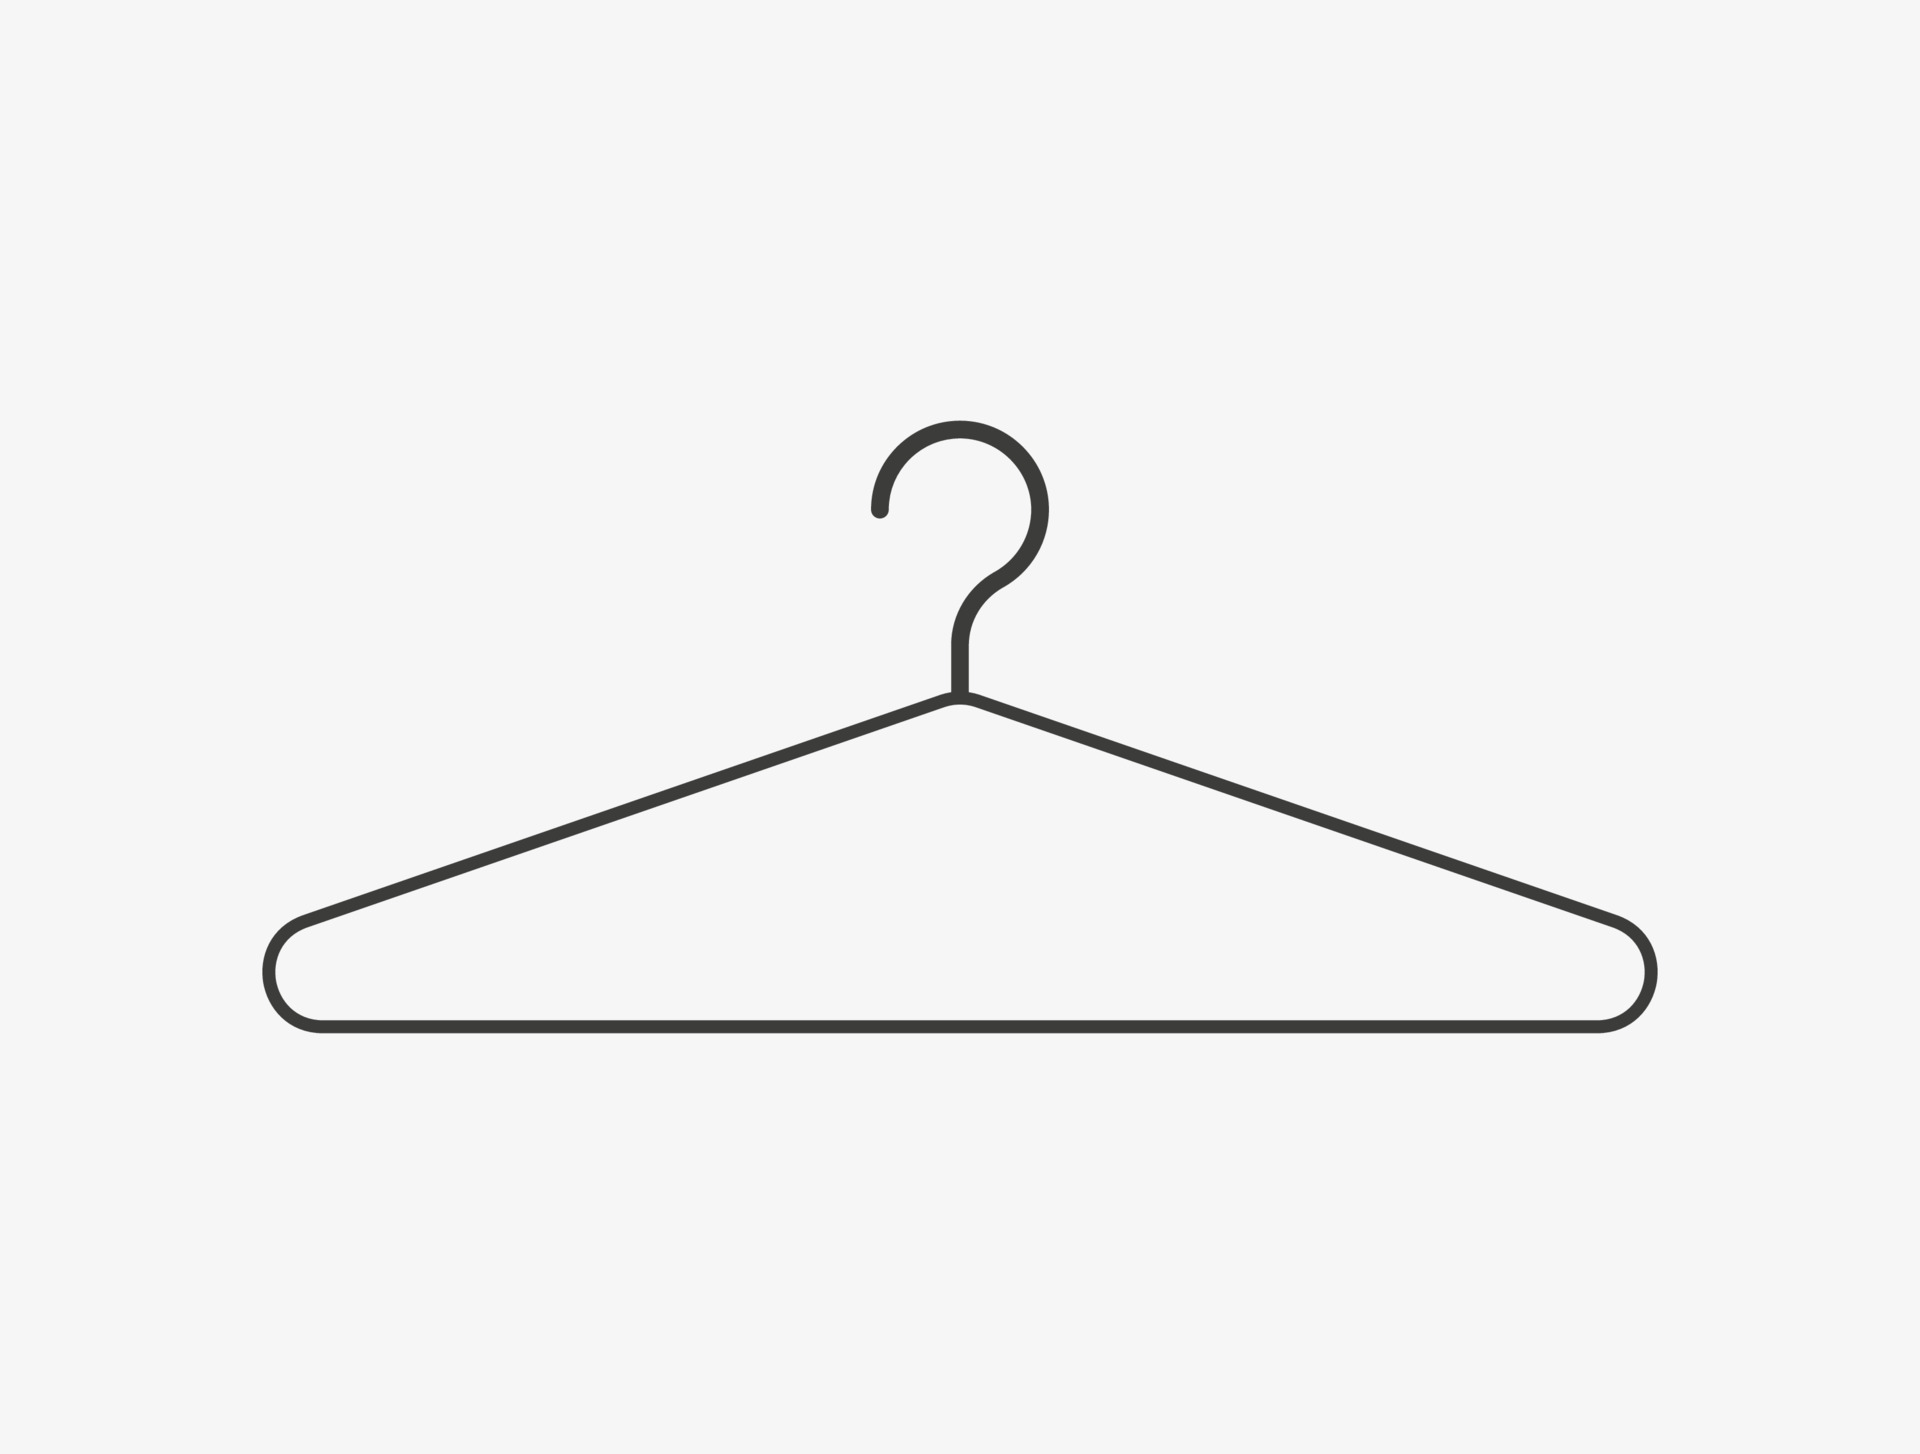 https://static.vecteezy.com/system/resources/previews/005/863/330/original/hanger-icon-outline-isolated-on-white-background-clothes-hanger-symbol-free-vector.jpg